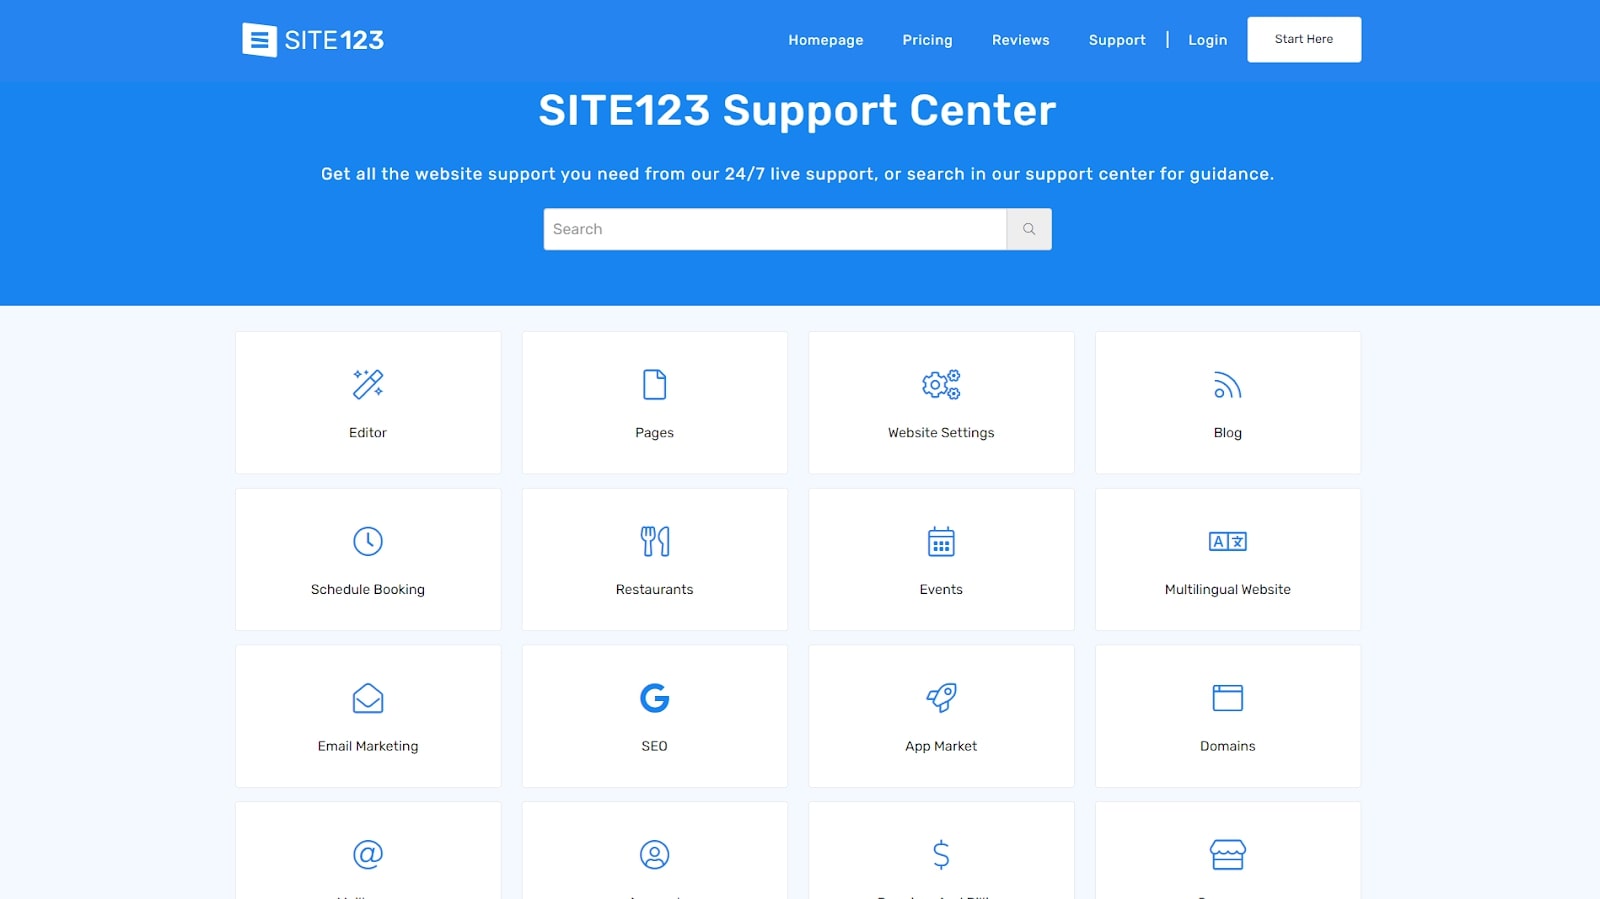 Site123's support center homepage